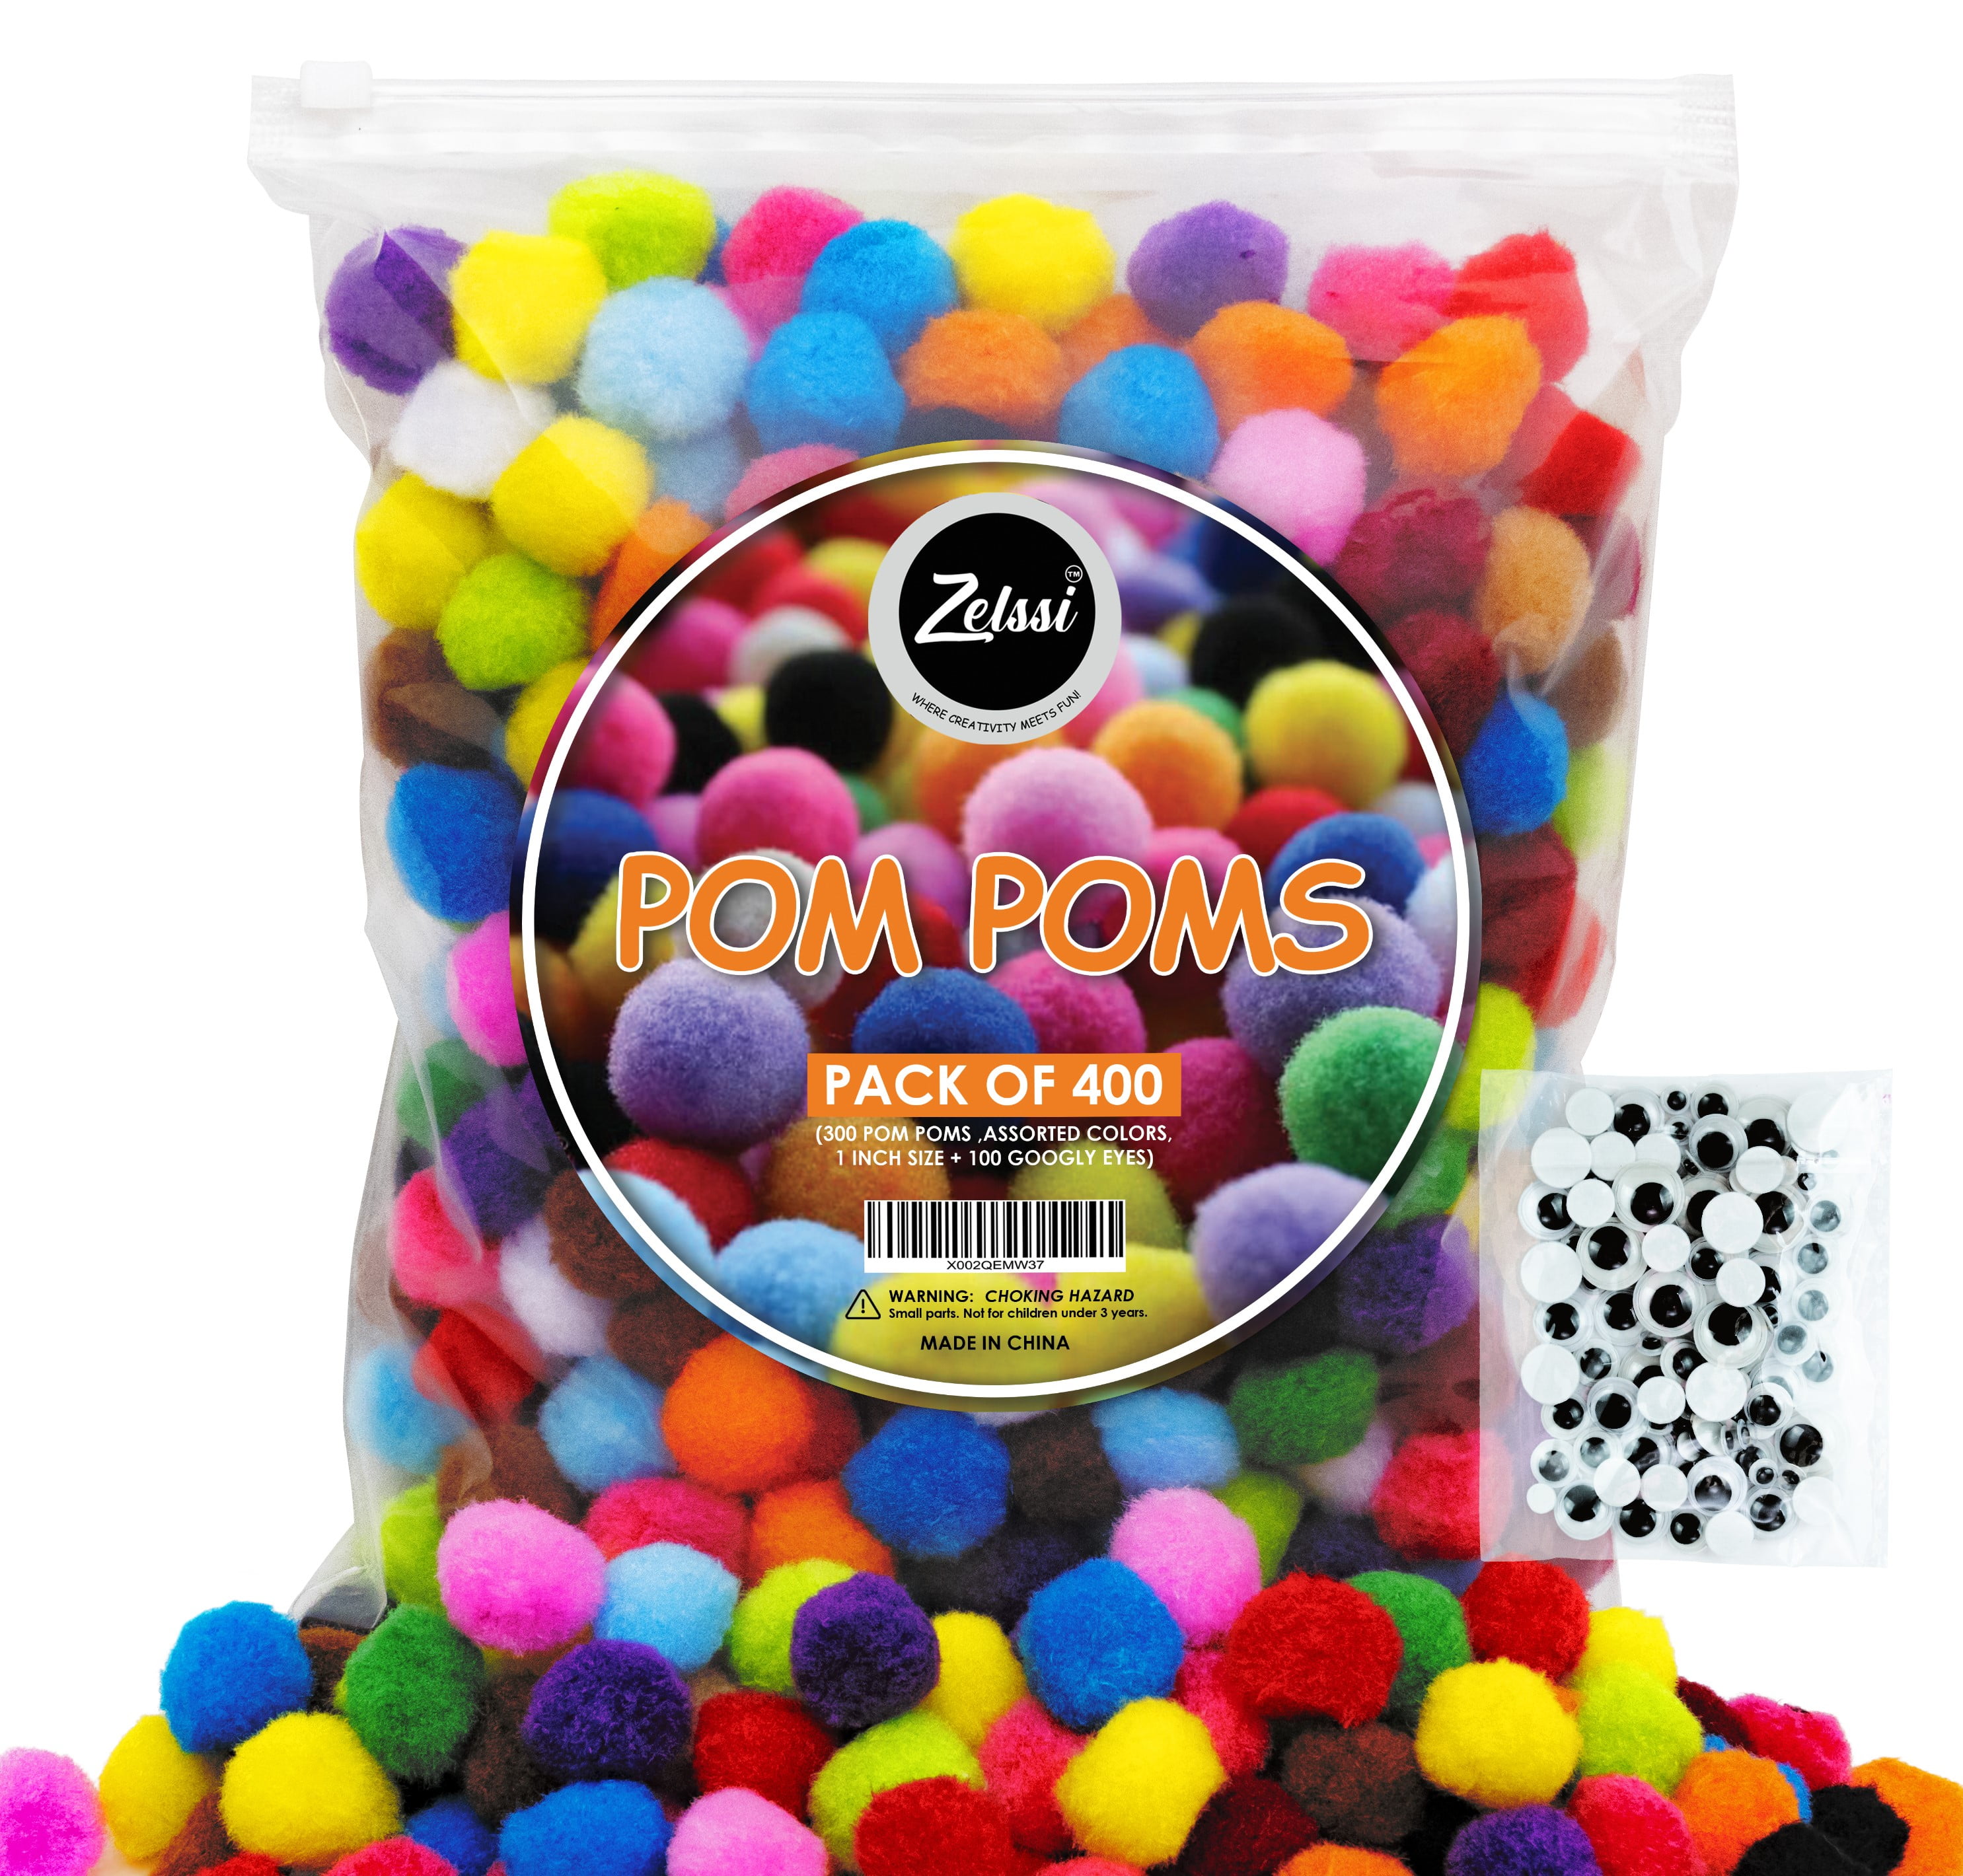 Multicolor DIY Arts And Craft Pom-Poms, 100 Piece Variety Pack Assortment